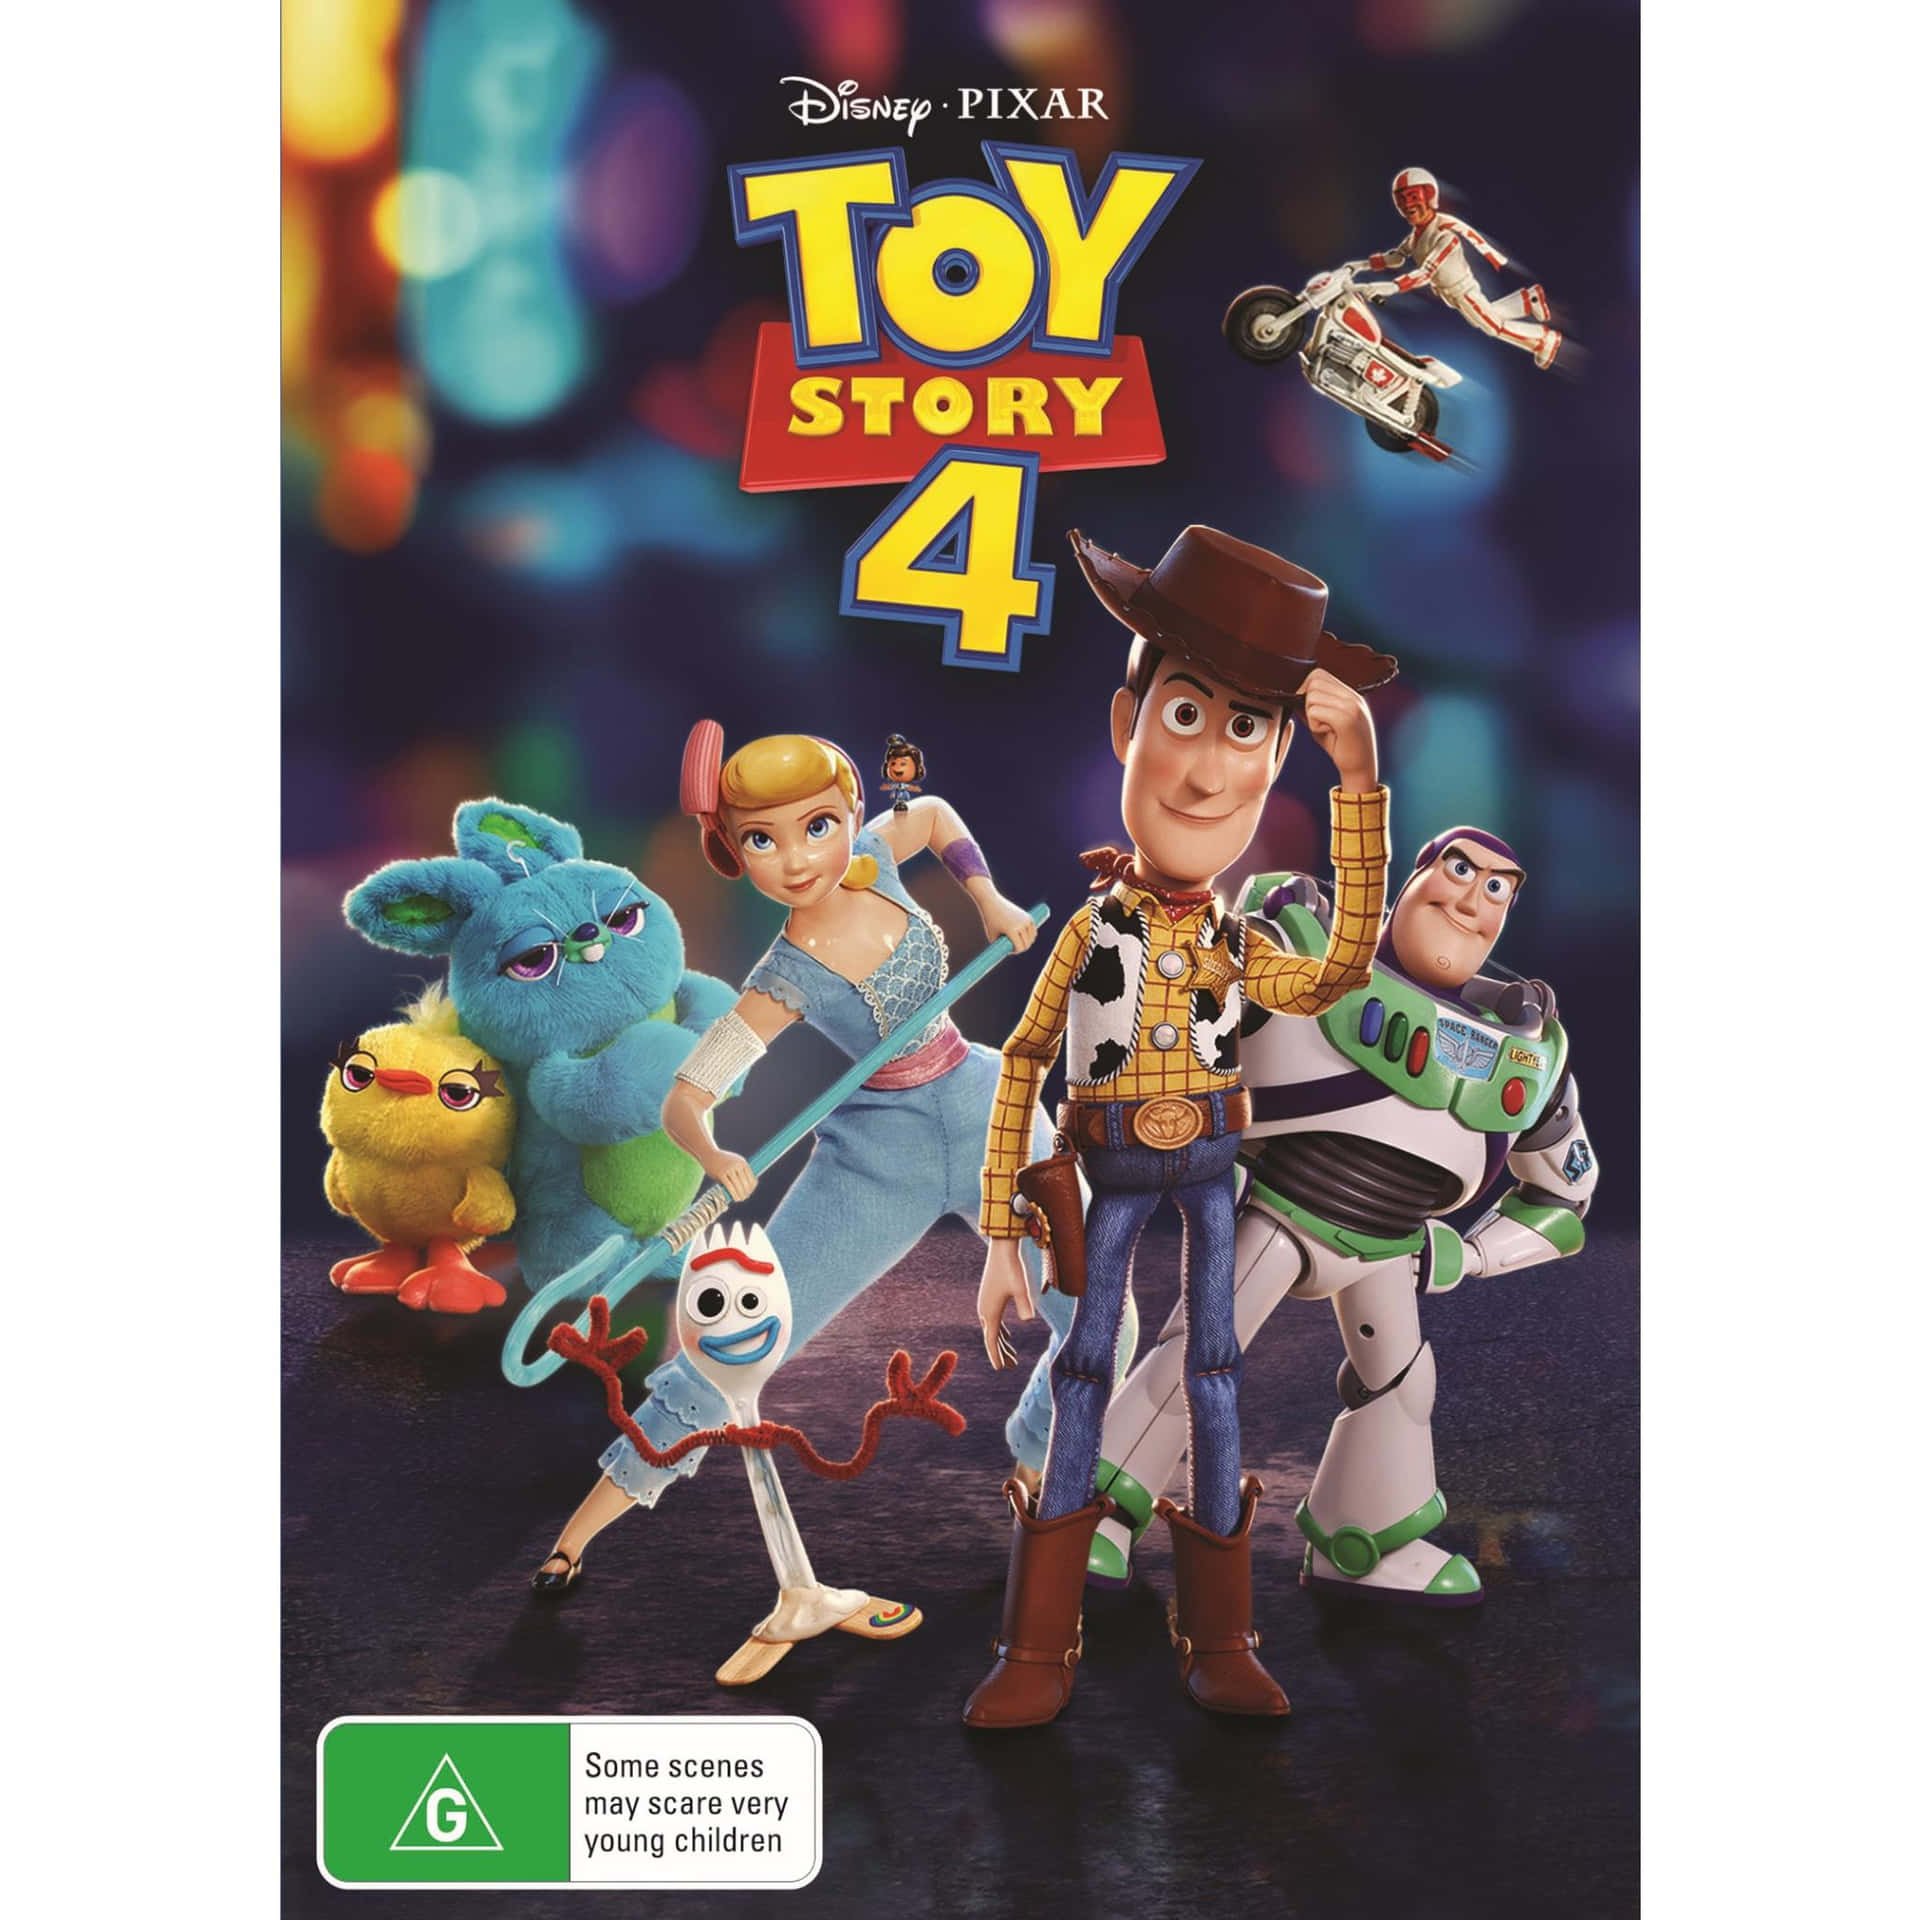 Woody, Buzz Lightyear and the gang embark on a new and exciting adventure in "Toy Story 4."